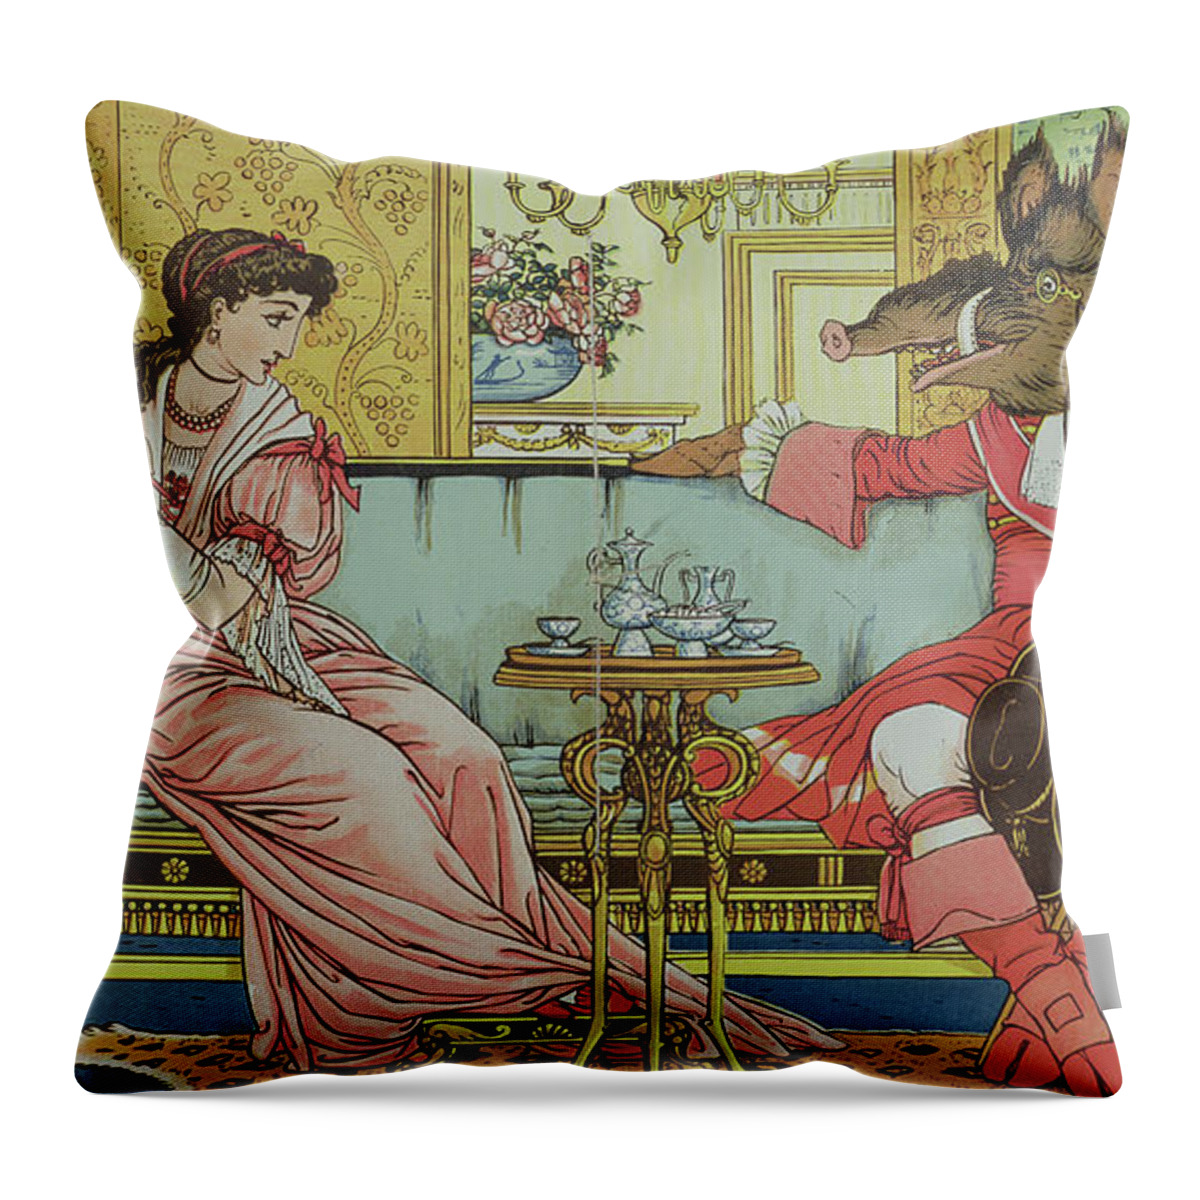 Beauty And The Beast Throw Pillow featuring the painting Illustration From Beauty And The Beast by Walter Crane